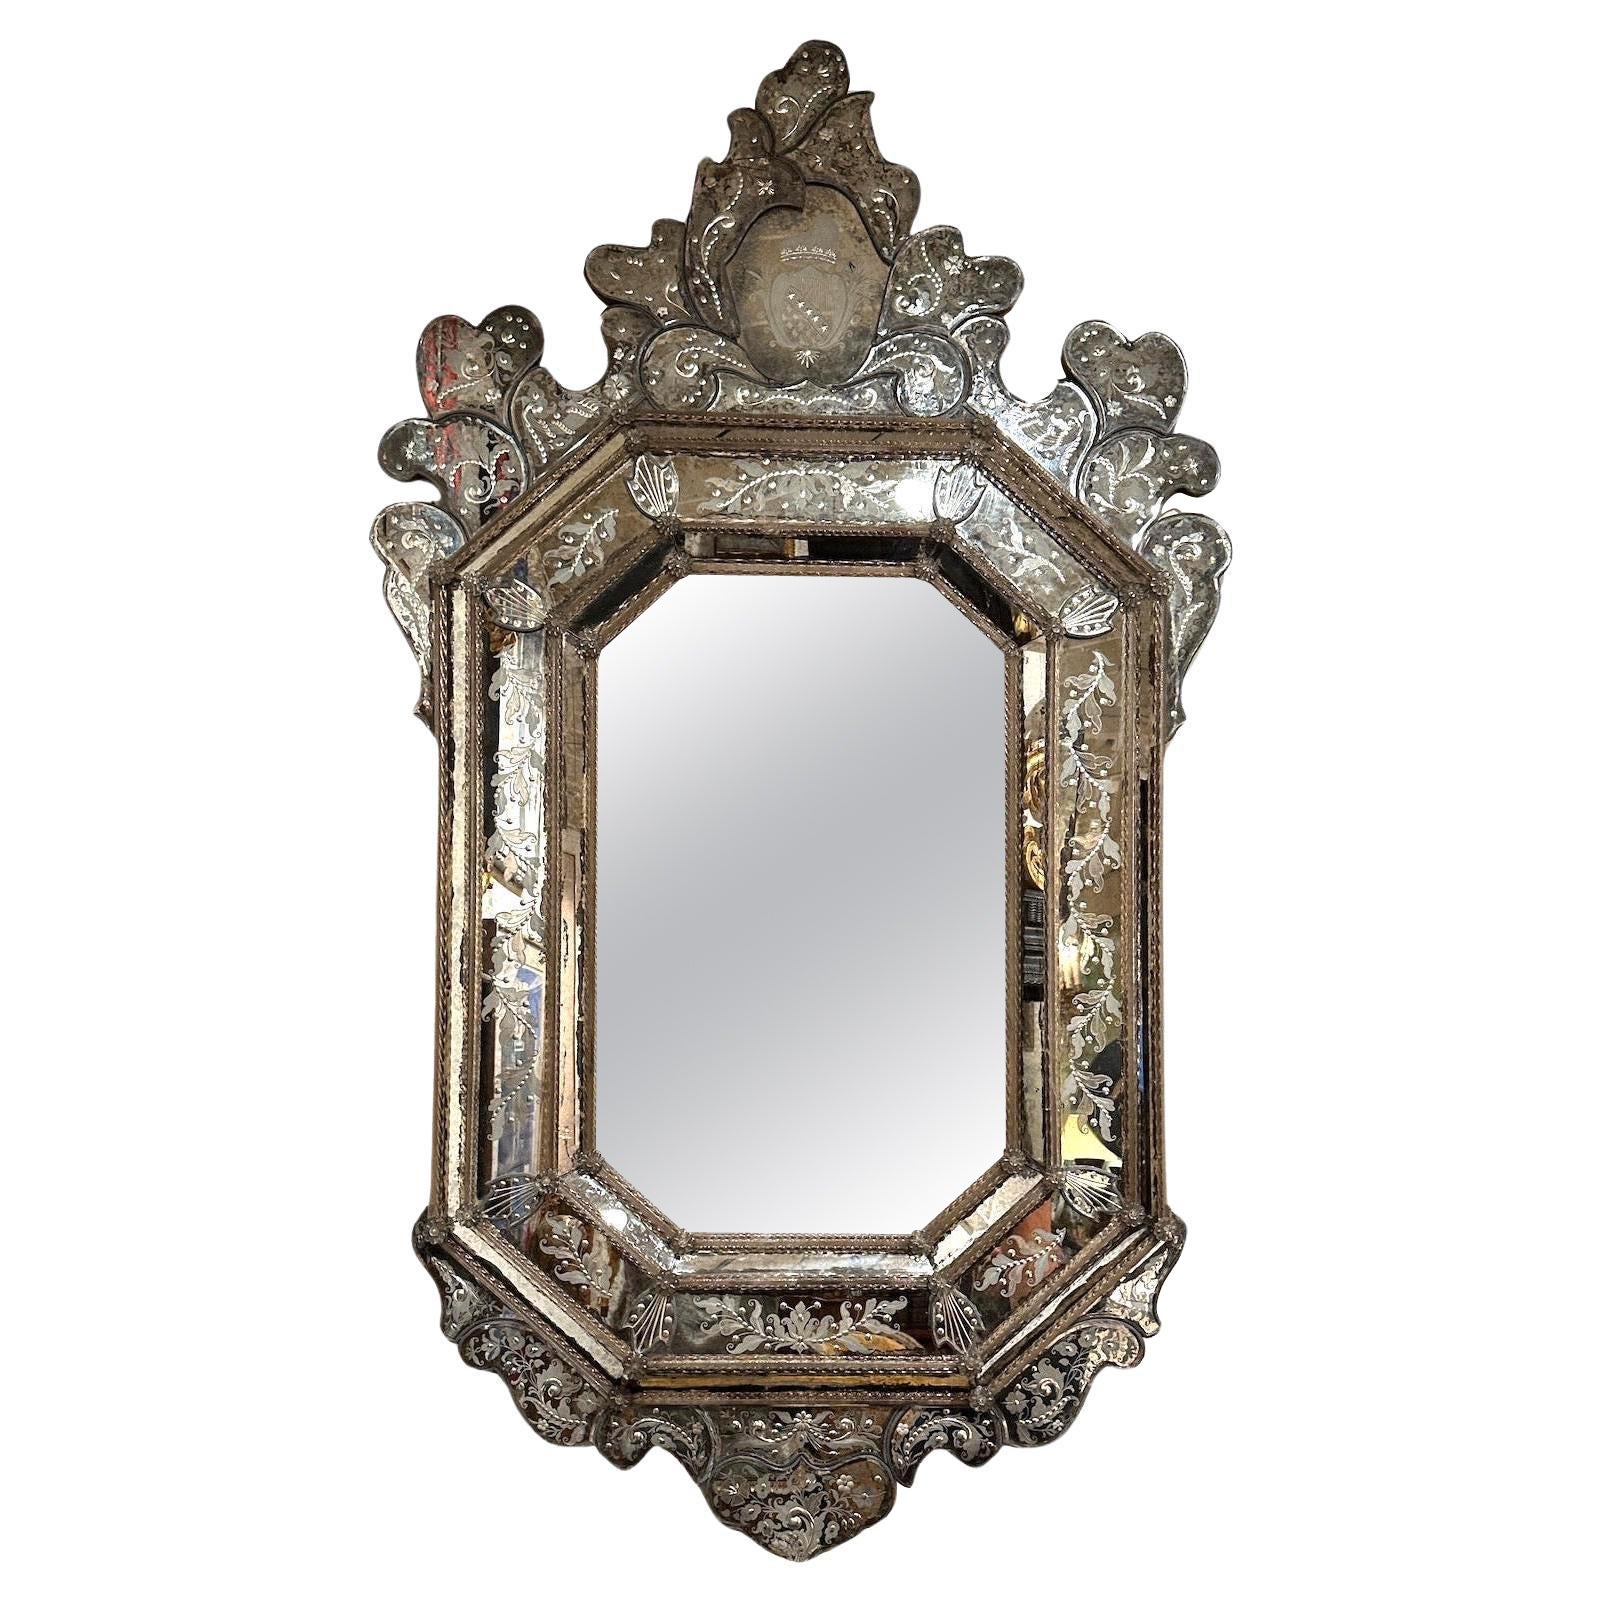 What room do you put Venetian mirrors in?